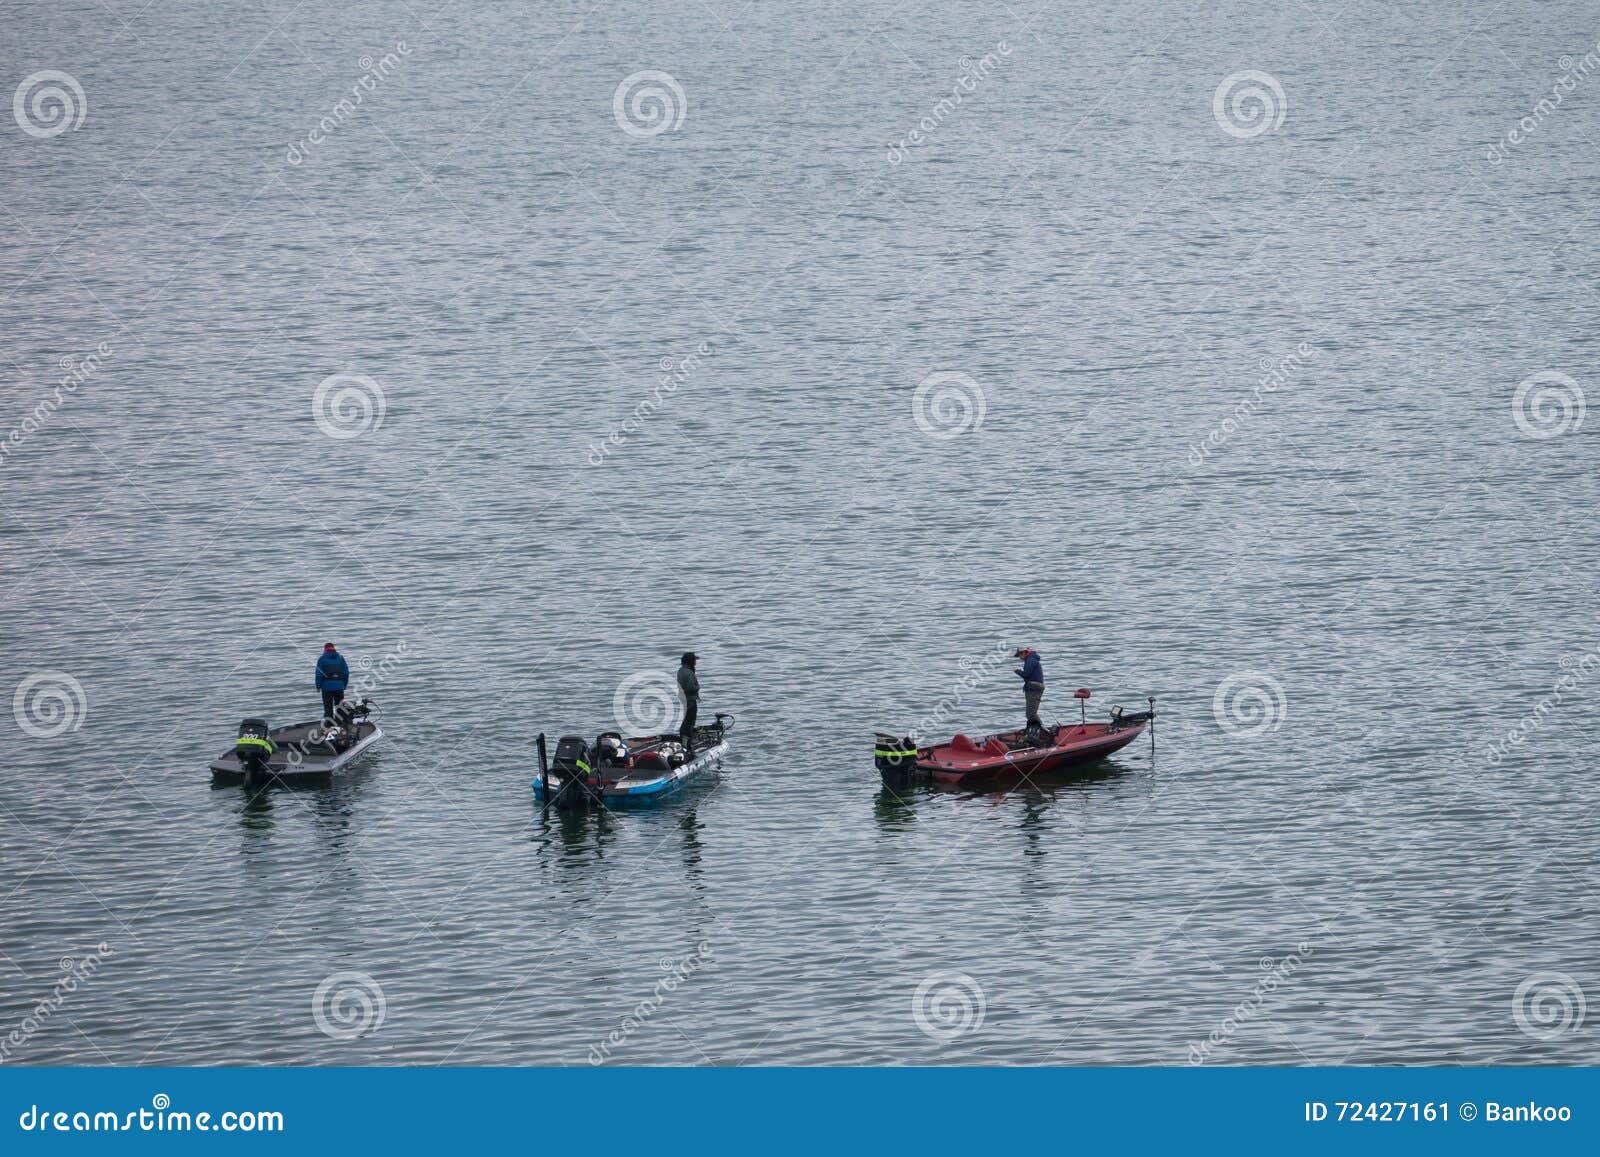 English: Two men and boy fishing in unidentified river with poles